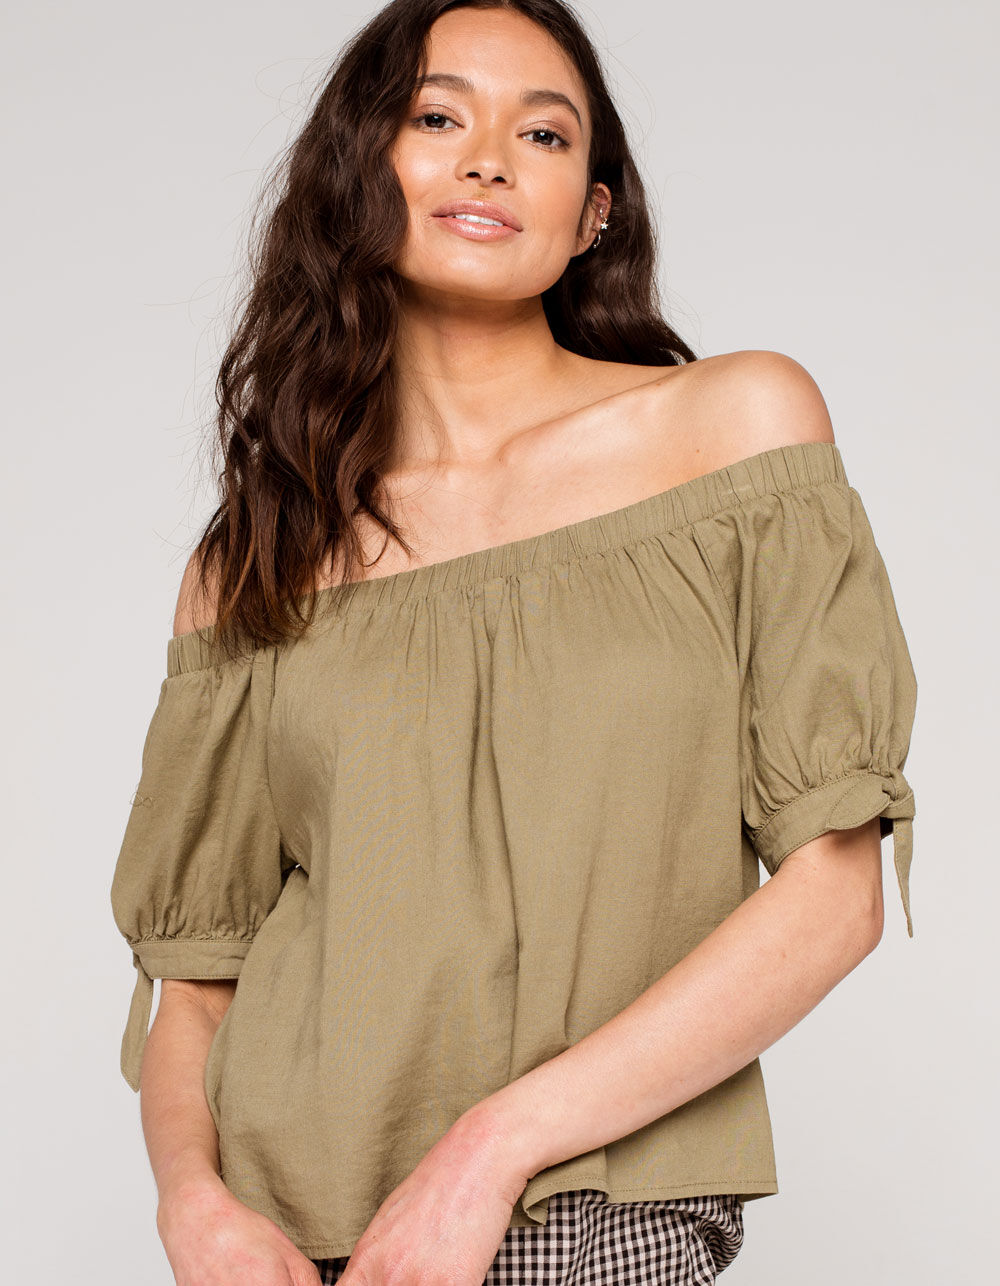 OTHERS FOLLOW Off The Shoulder Womens Top - ARMY | Tillys